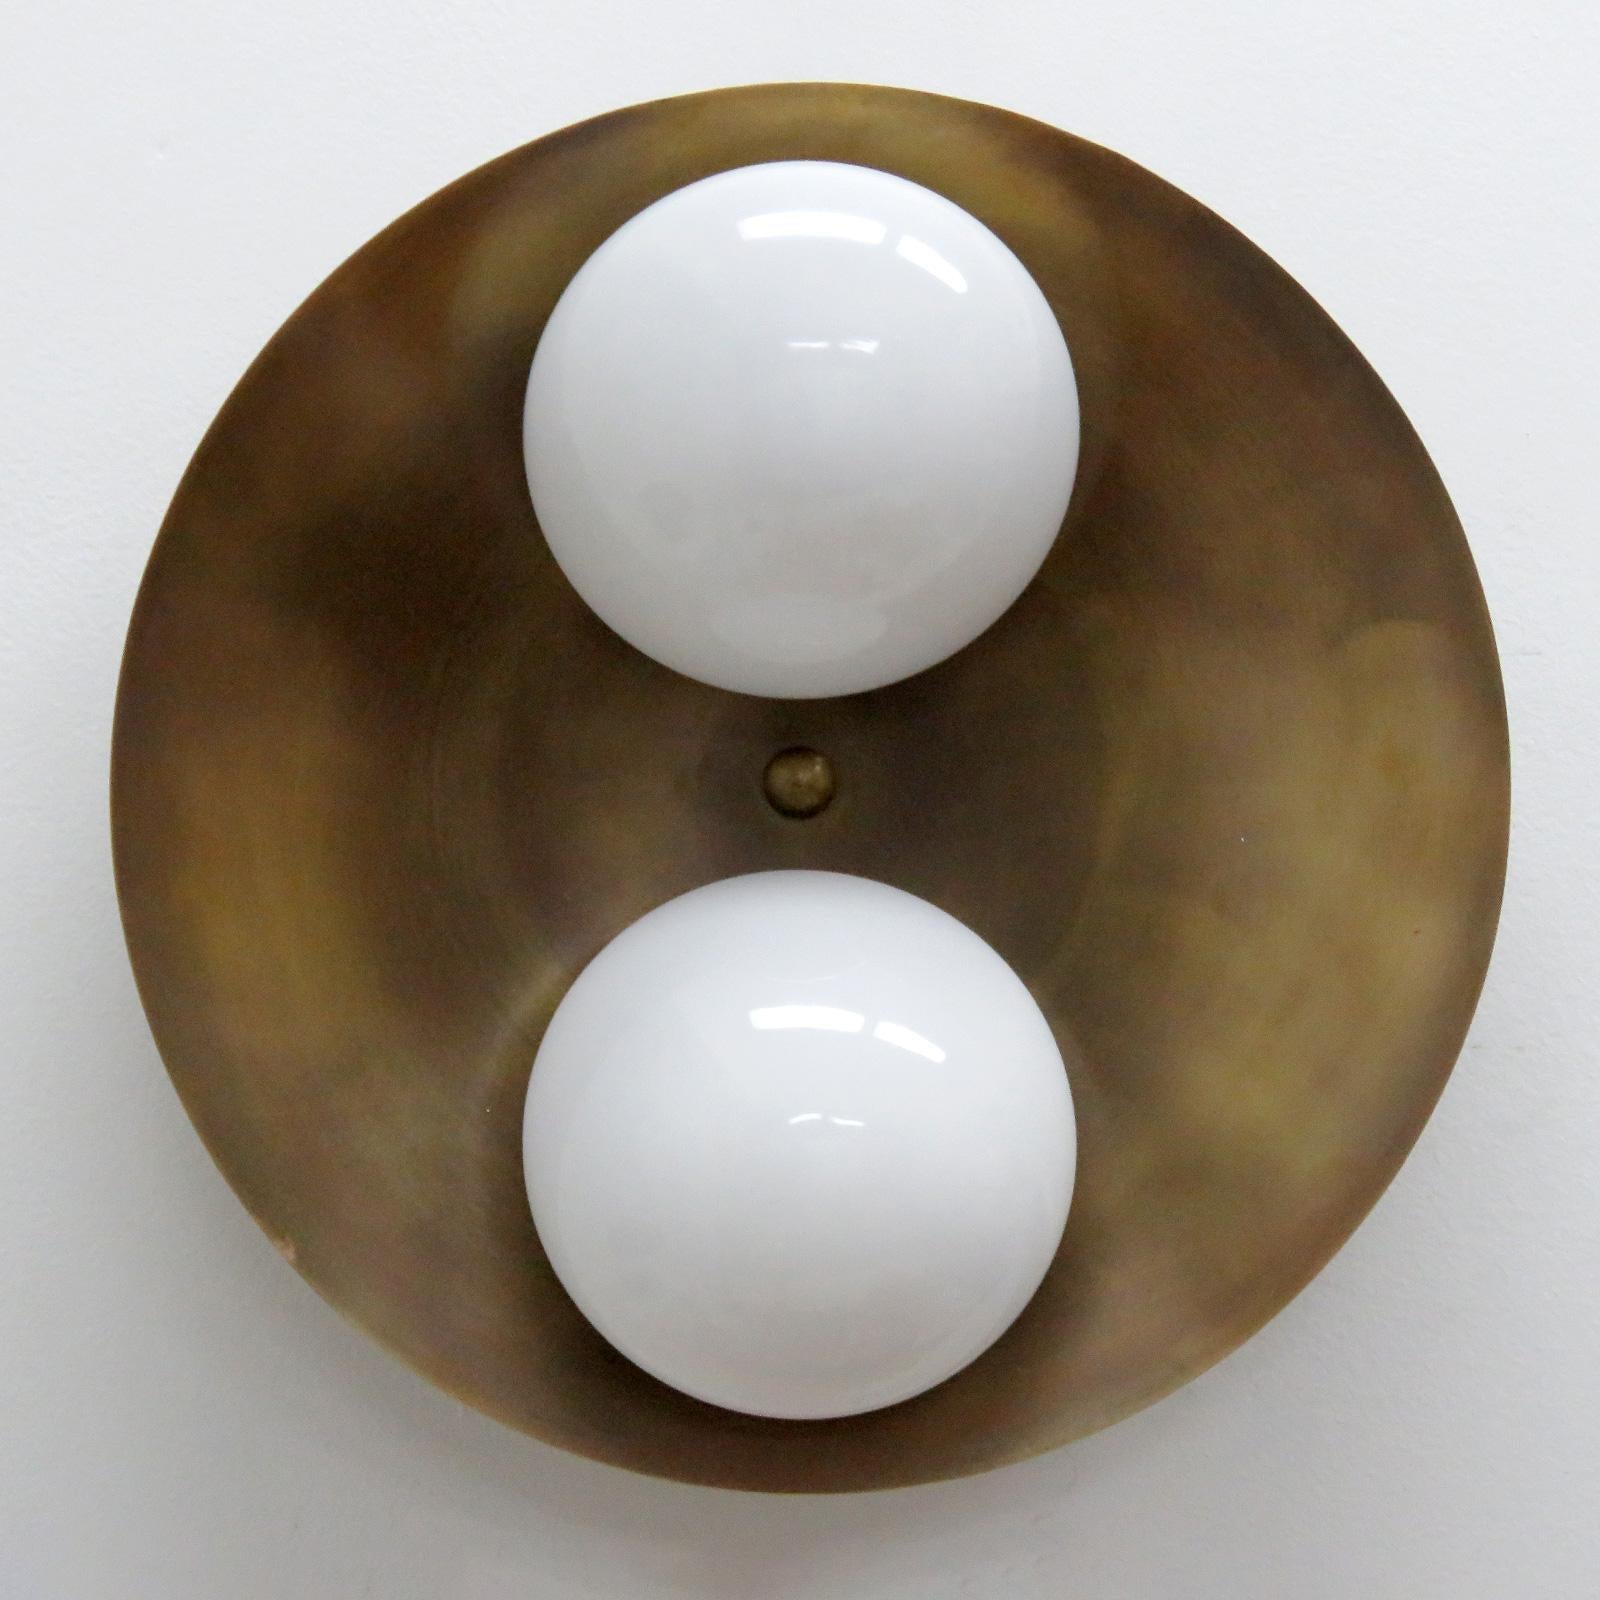 Elegant Binova wall or ceiling light designed by Gallery L7, handcrafted and finished in Los Angeles from American brass, with two opaline glass shades on an aged raw brass disc. Two E12 sockets per fixture, max. wattage 60w each, wired for US